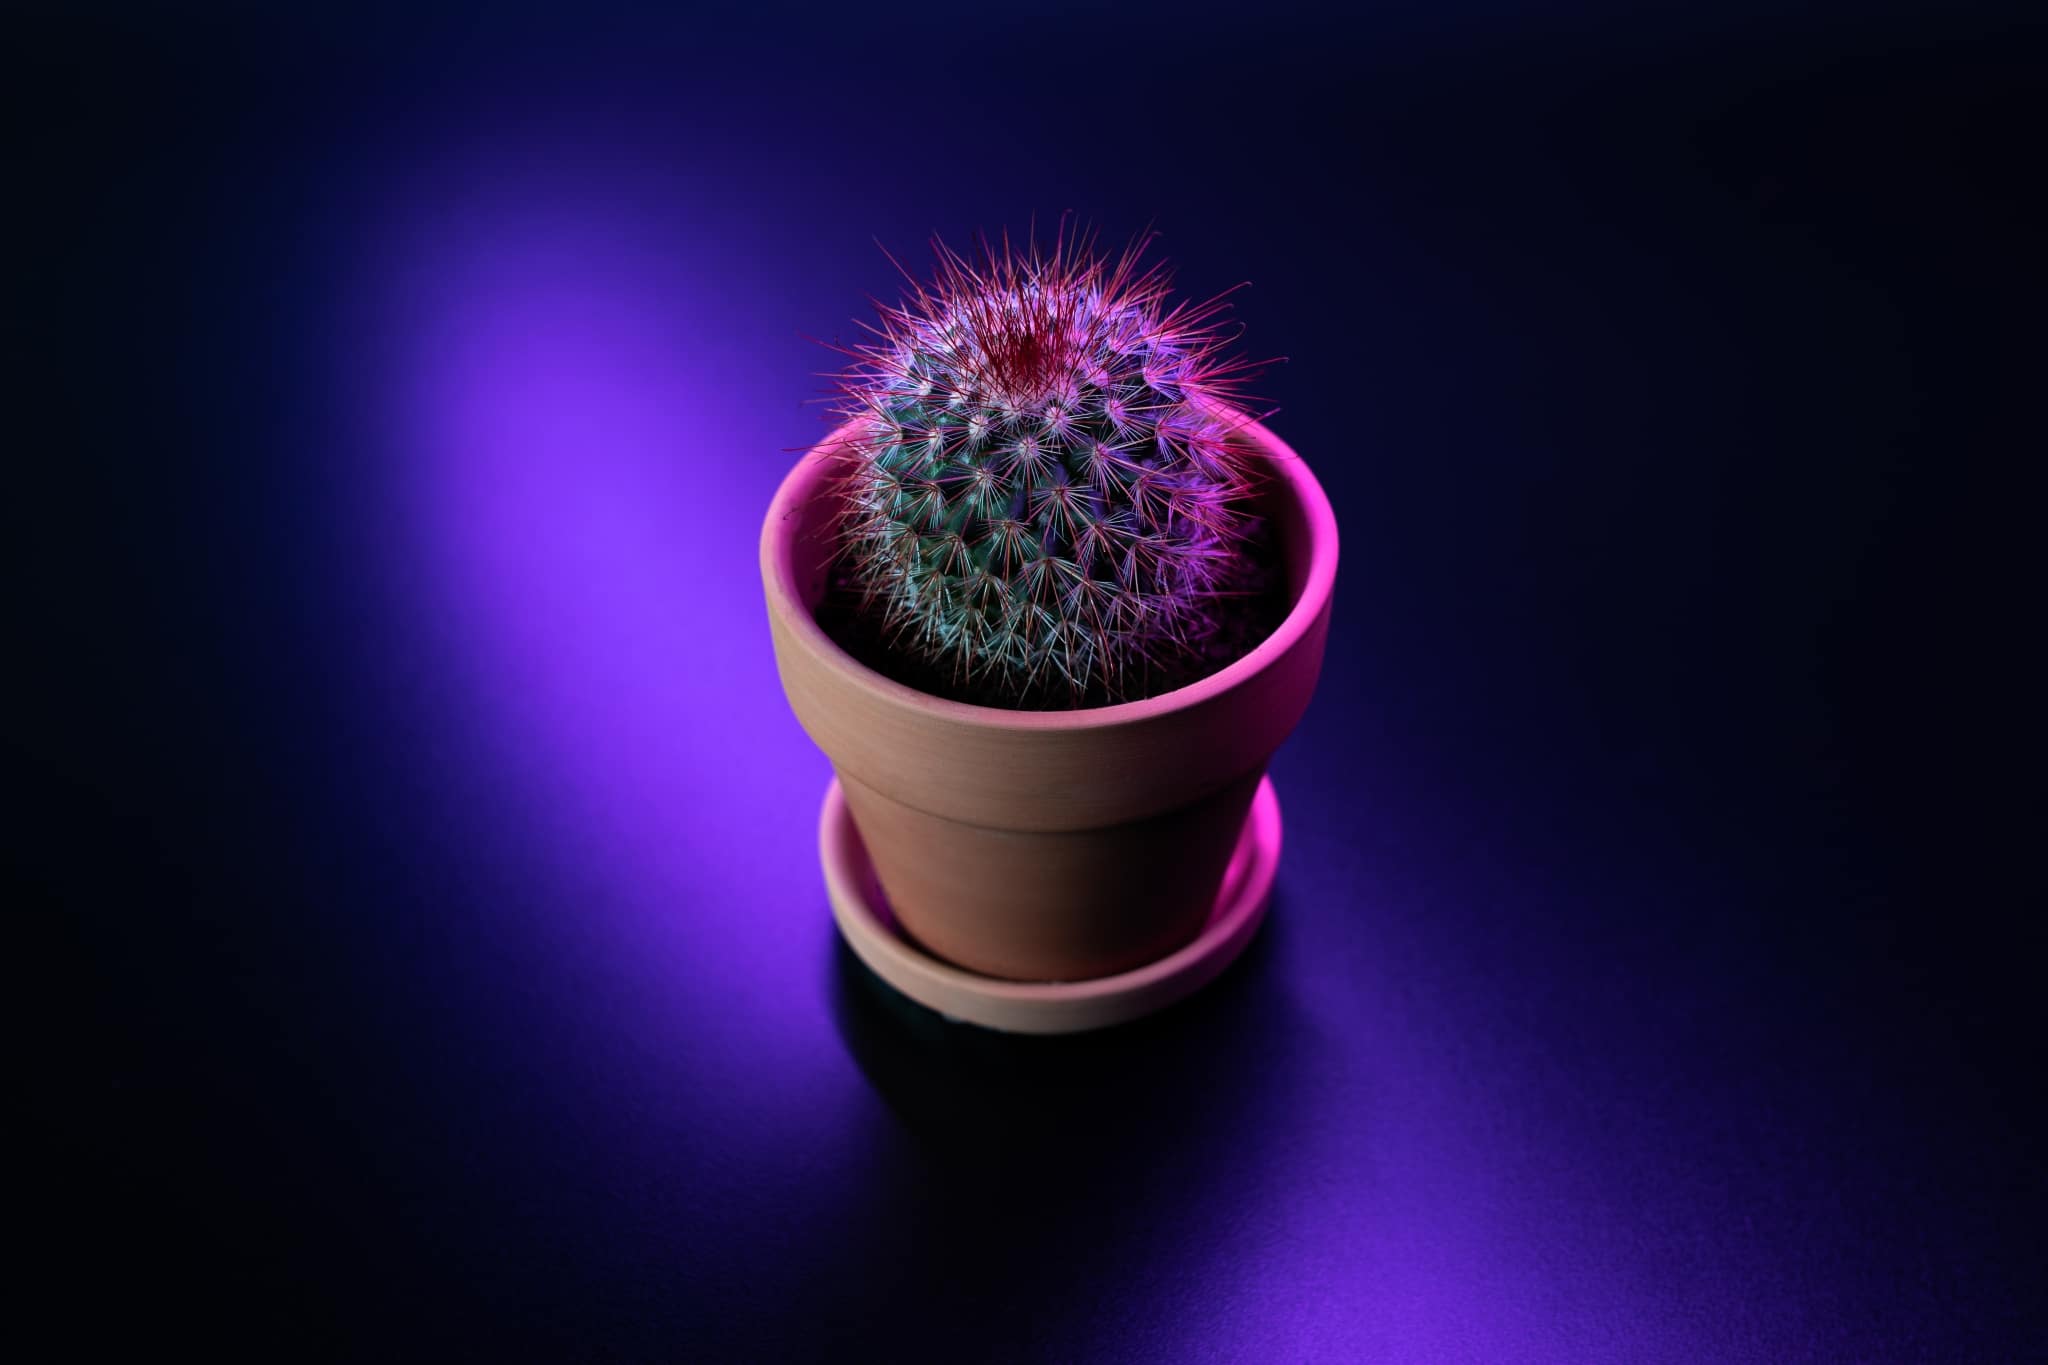 colorful cactus, abstract still life photography